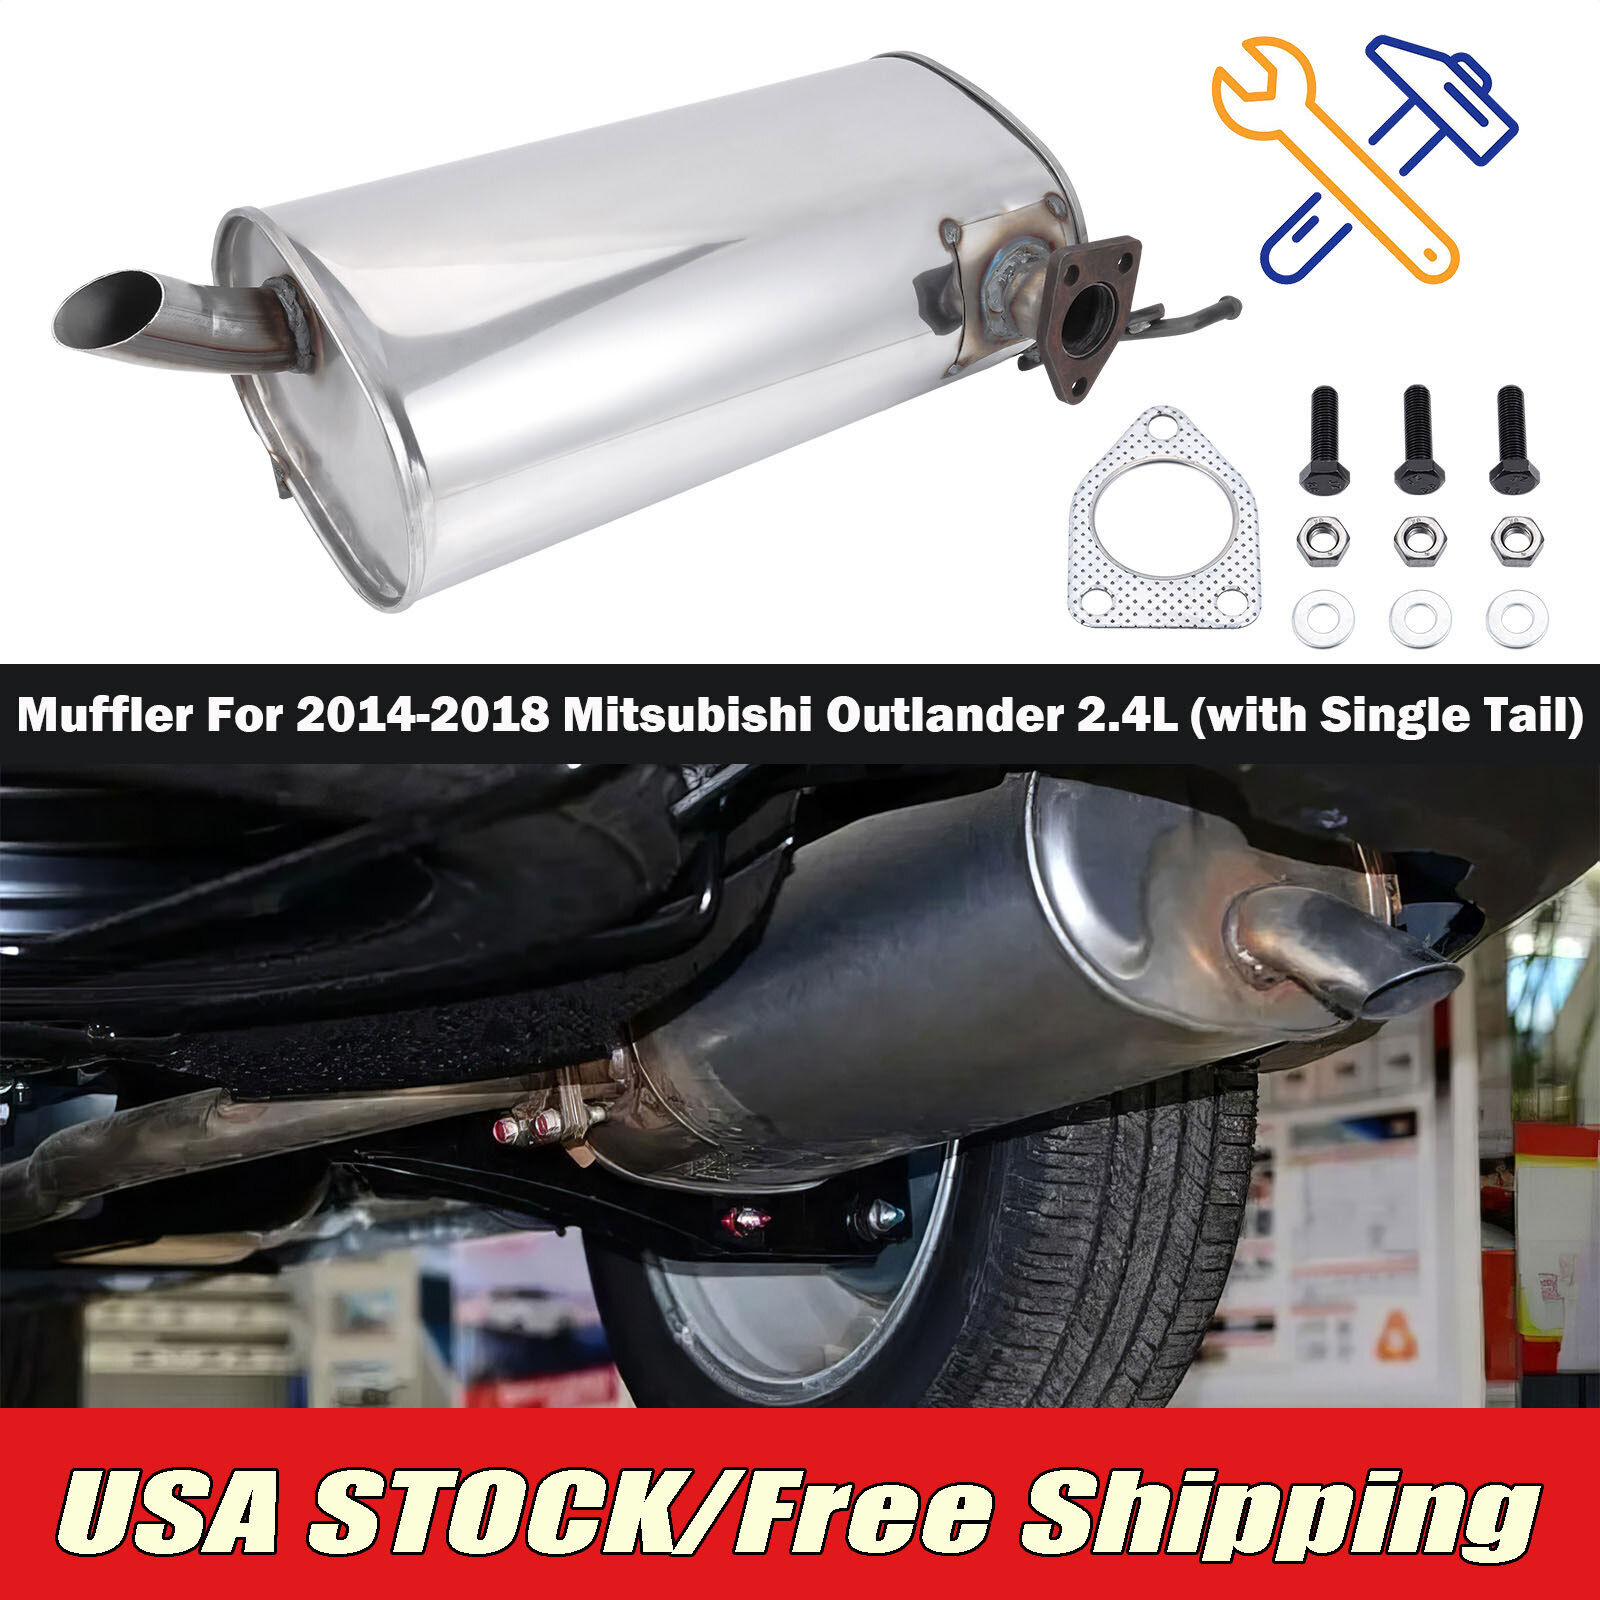 Muffler with Single Tail Fits For Mitsubishi Outlander 2.4L 2014 2015 2016~2018